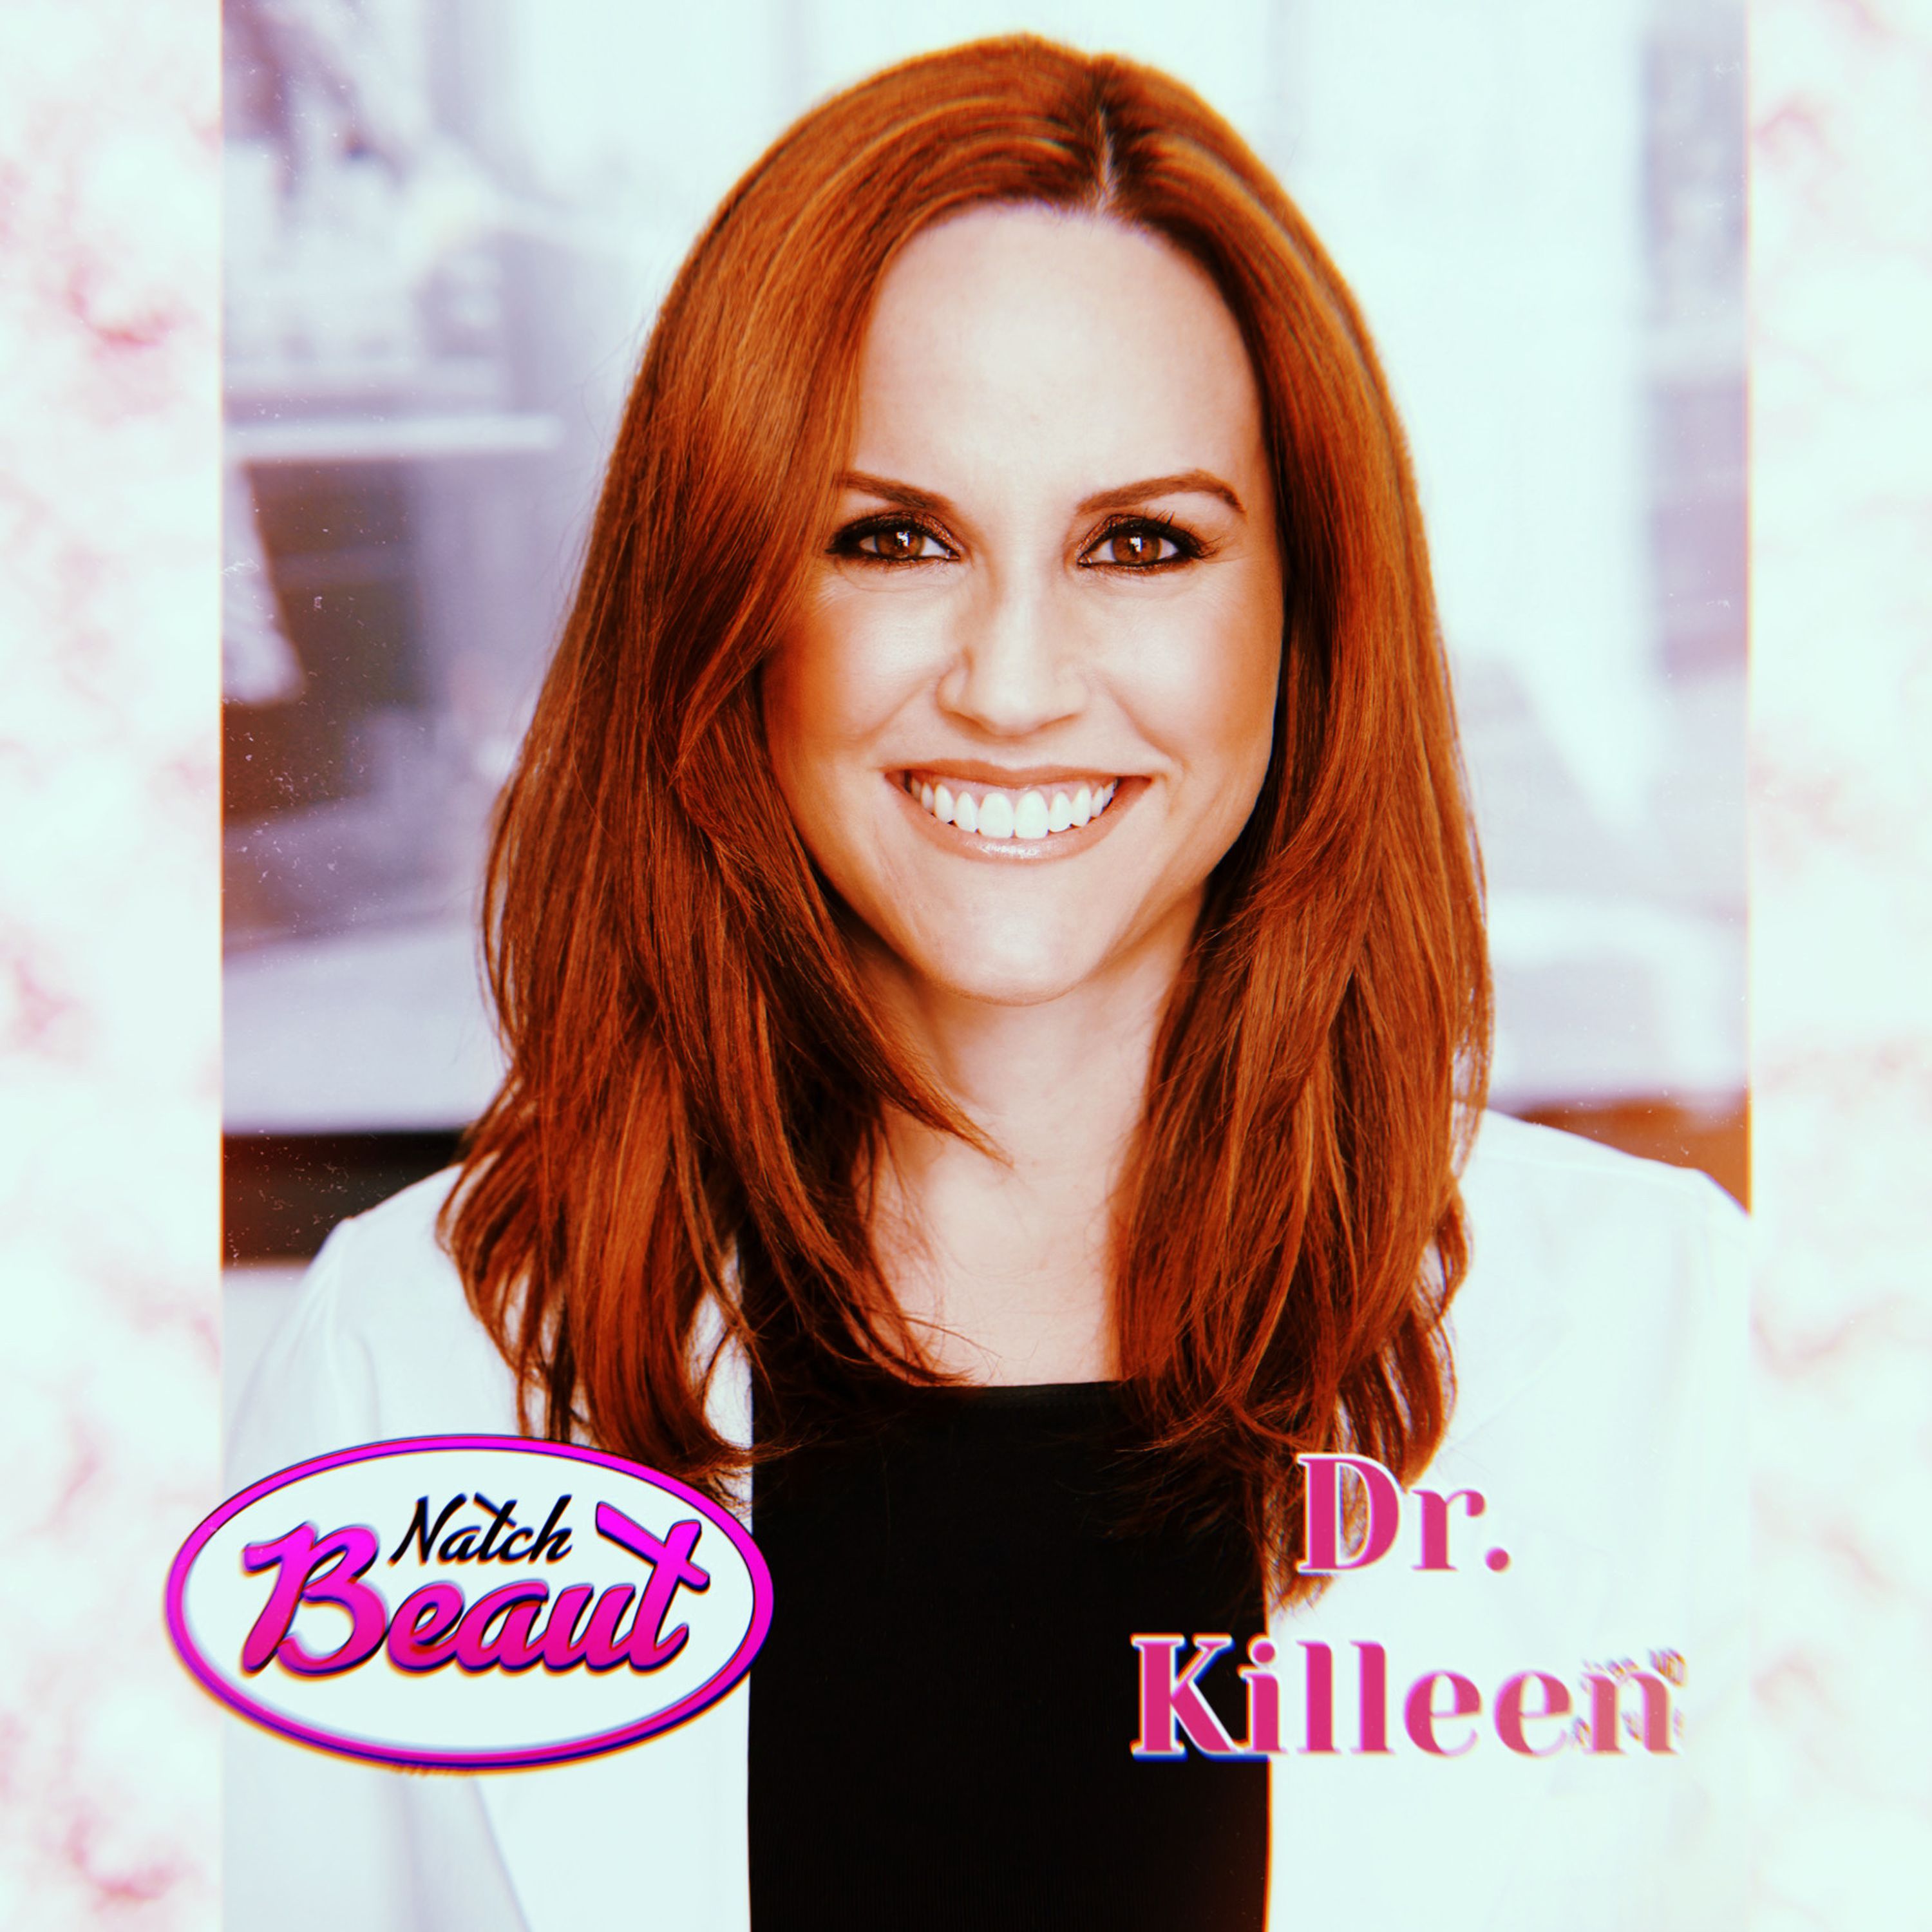 Breasts & Bodies with Dr. Kelly Killeen